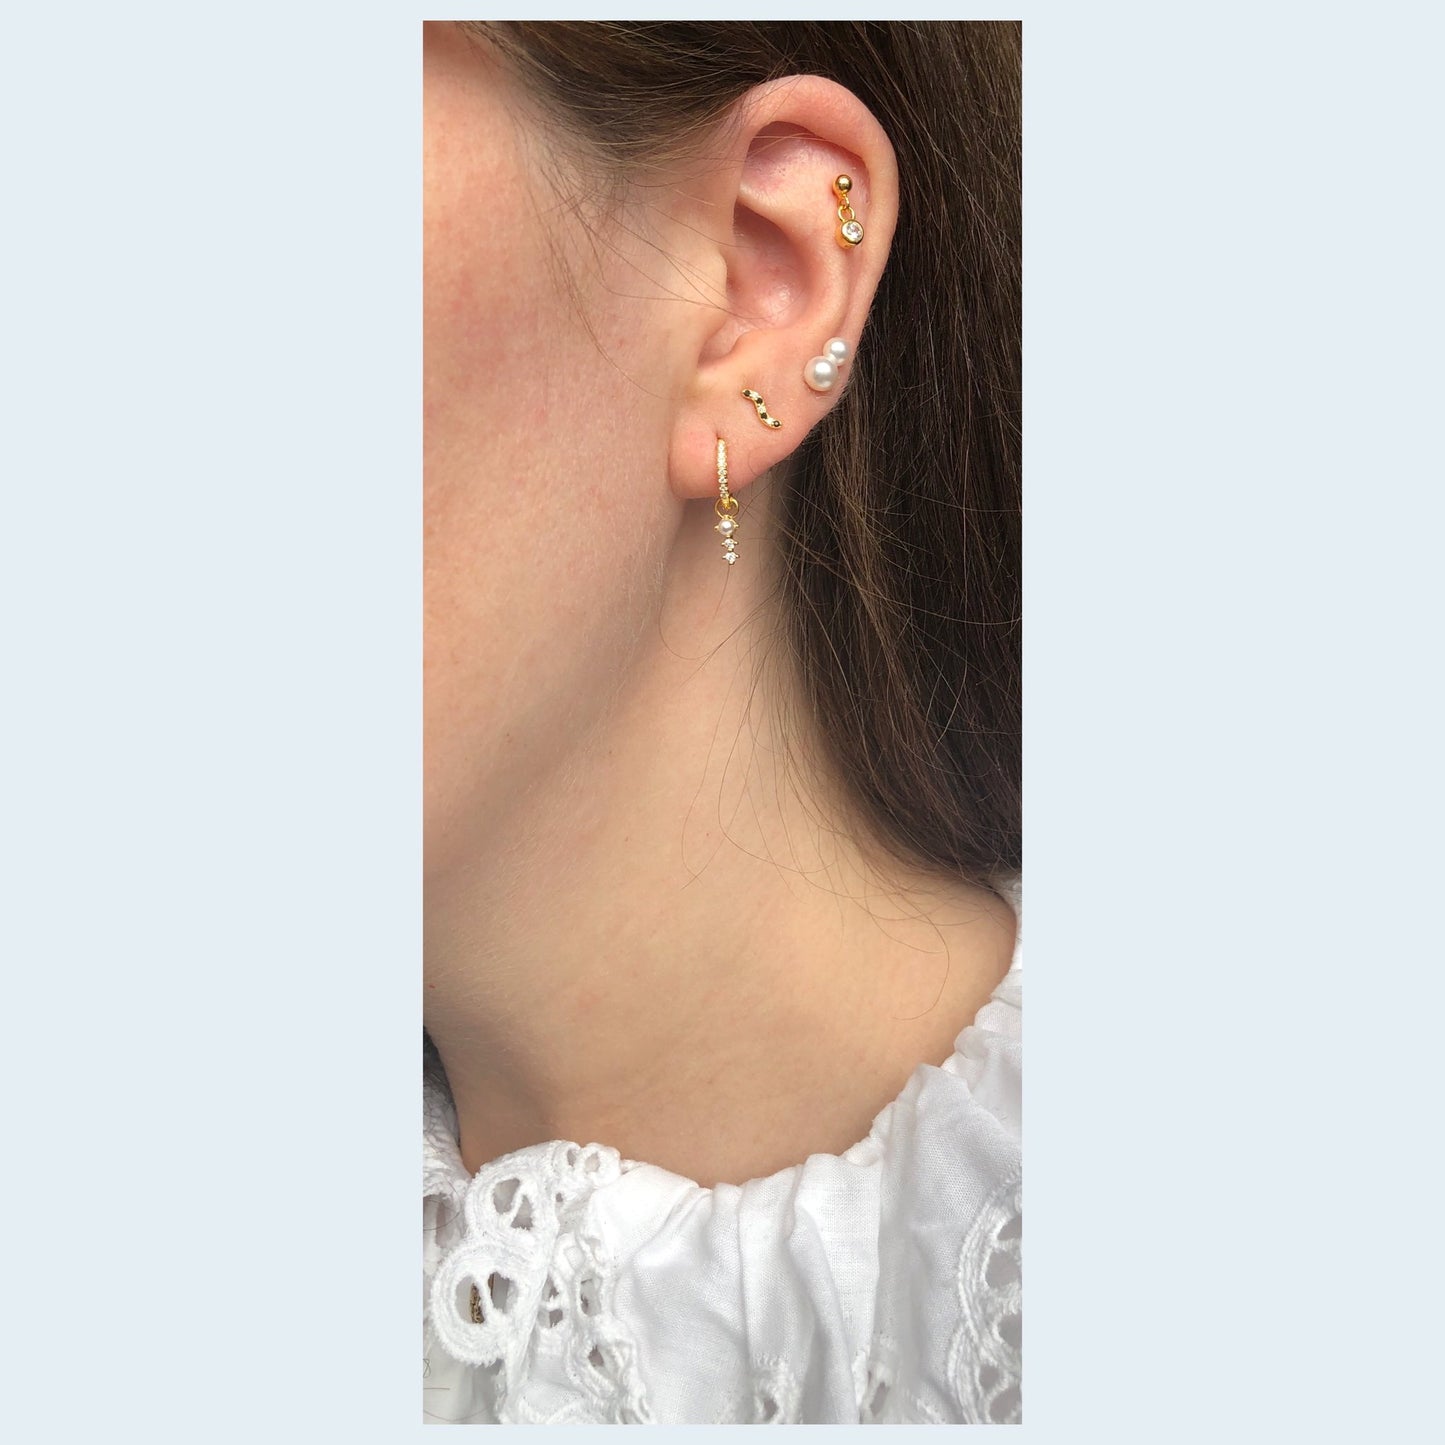 Wave Stud Earring -  Gold Plated Silver Ehite, Black Cubic zirconia